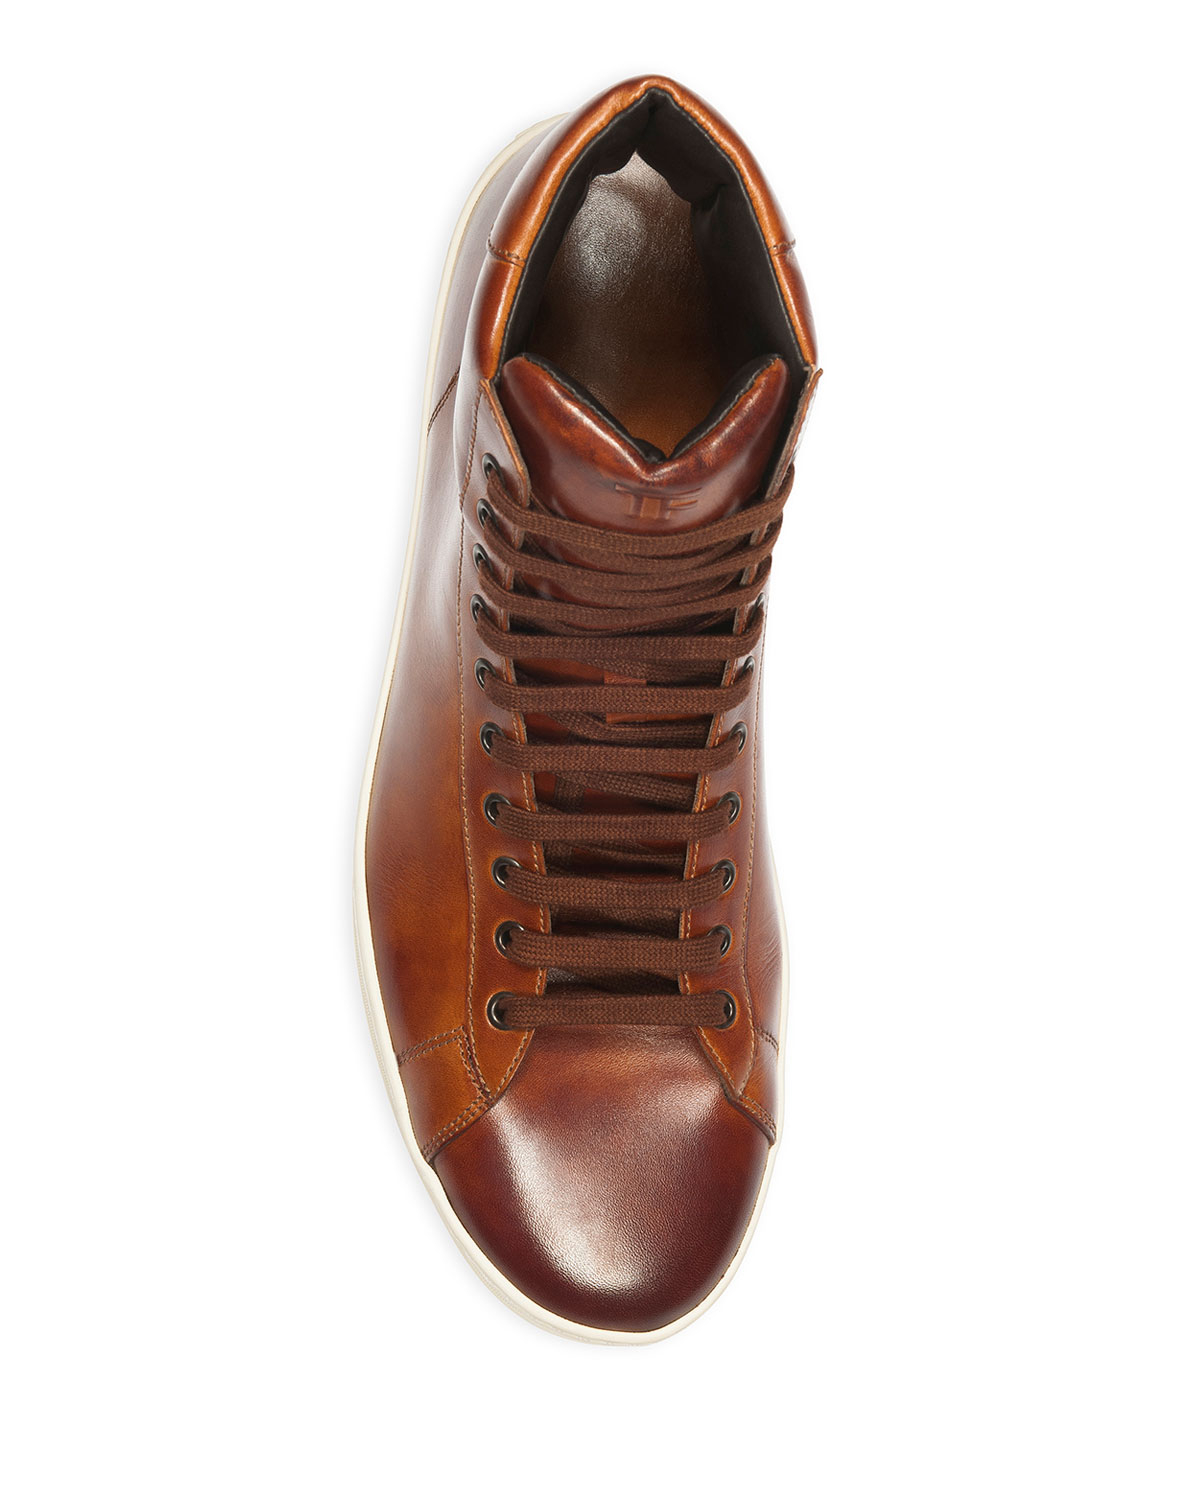 Tom Ford Russell Leather Hightop Sneaker in Light Brown (Brown) for Men ...